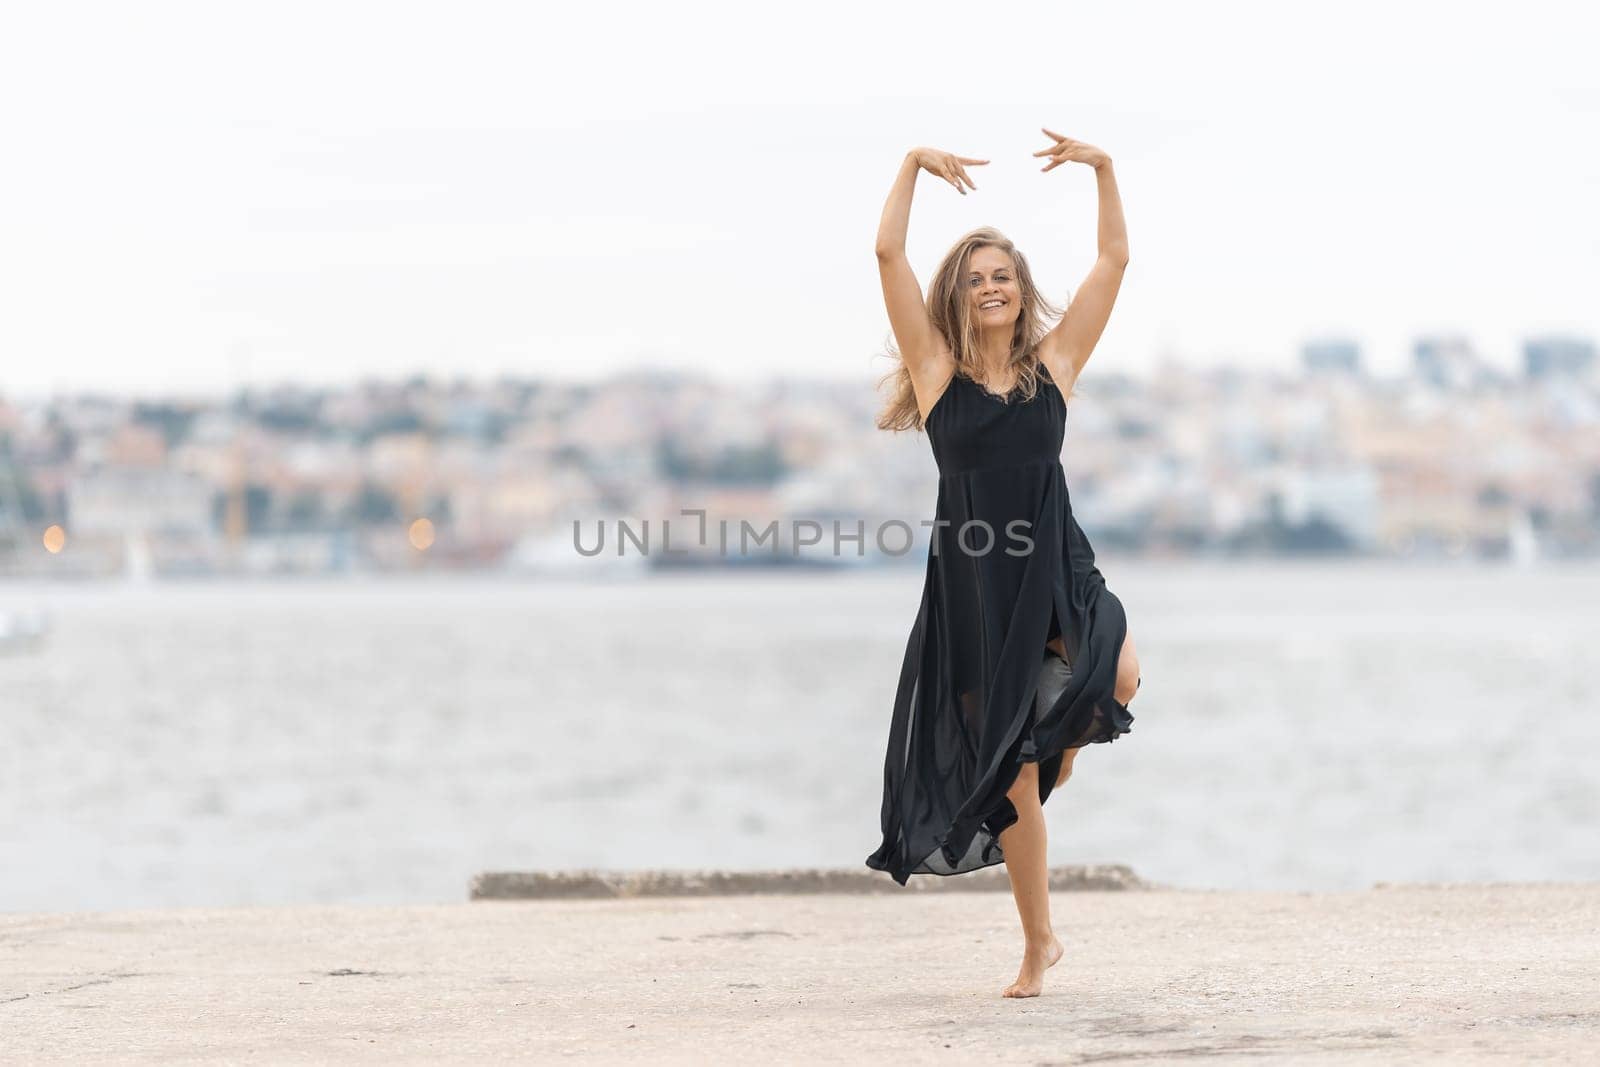 An adult smiling woman in black dress dancing ballet on the pier in cloudy weather. Mid shot